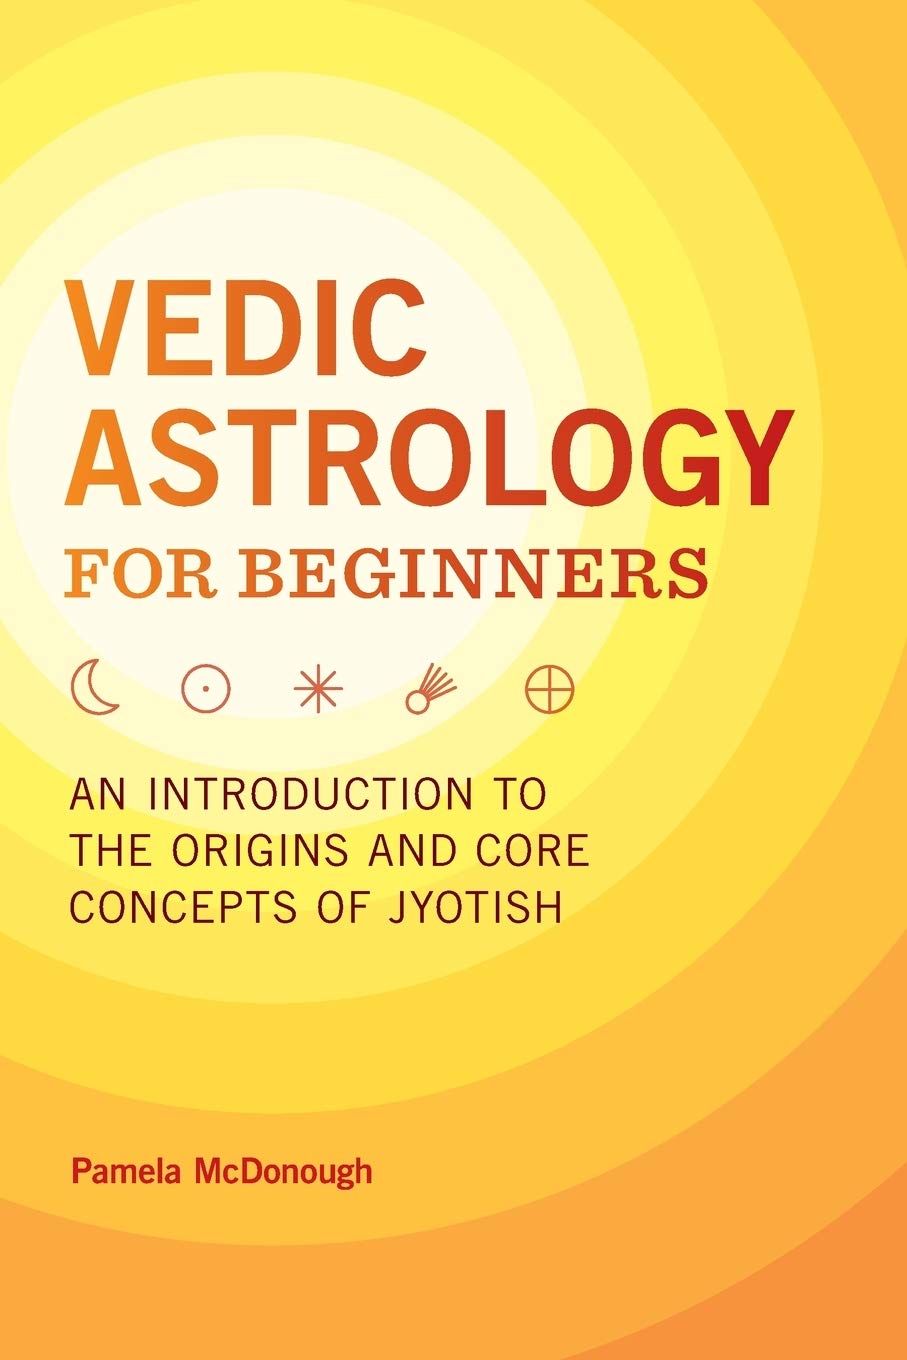 Vedic Astrology for Beginners: An Introduction to the Origins and Core Concepts of Jyotish